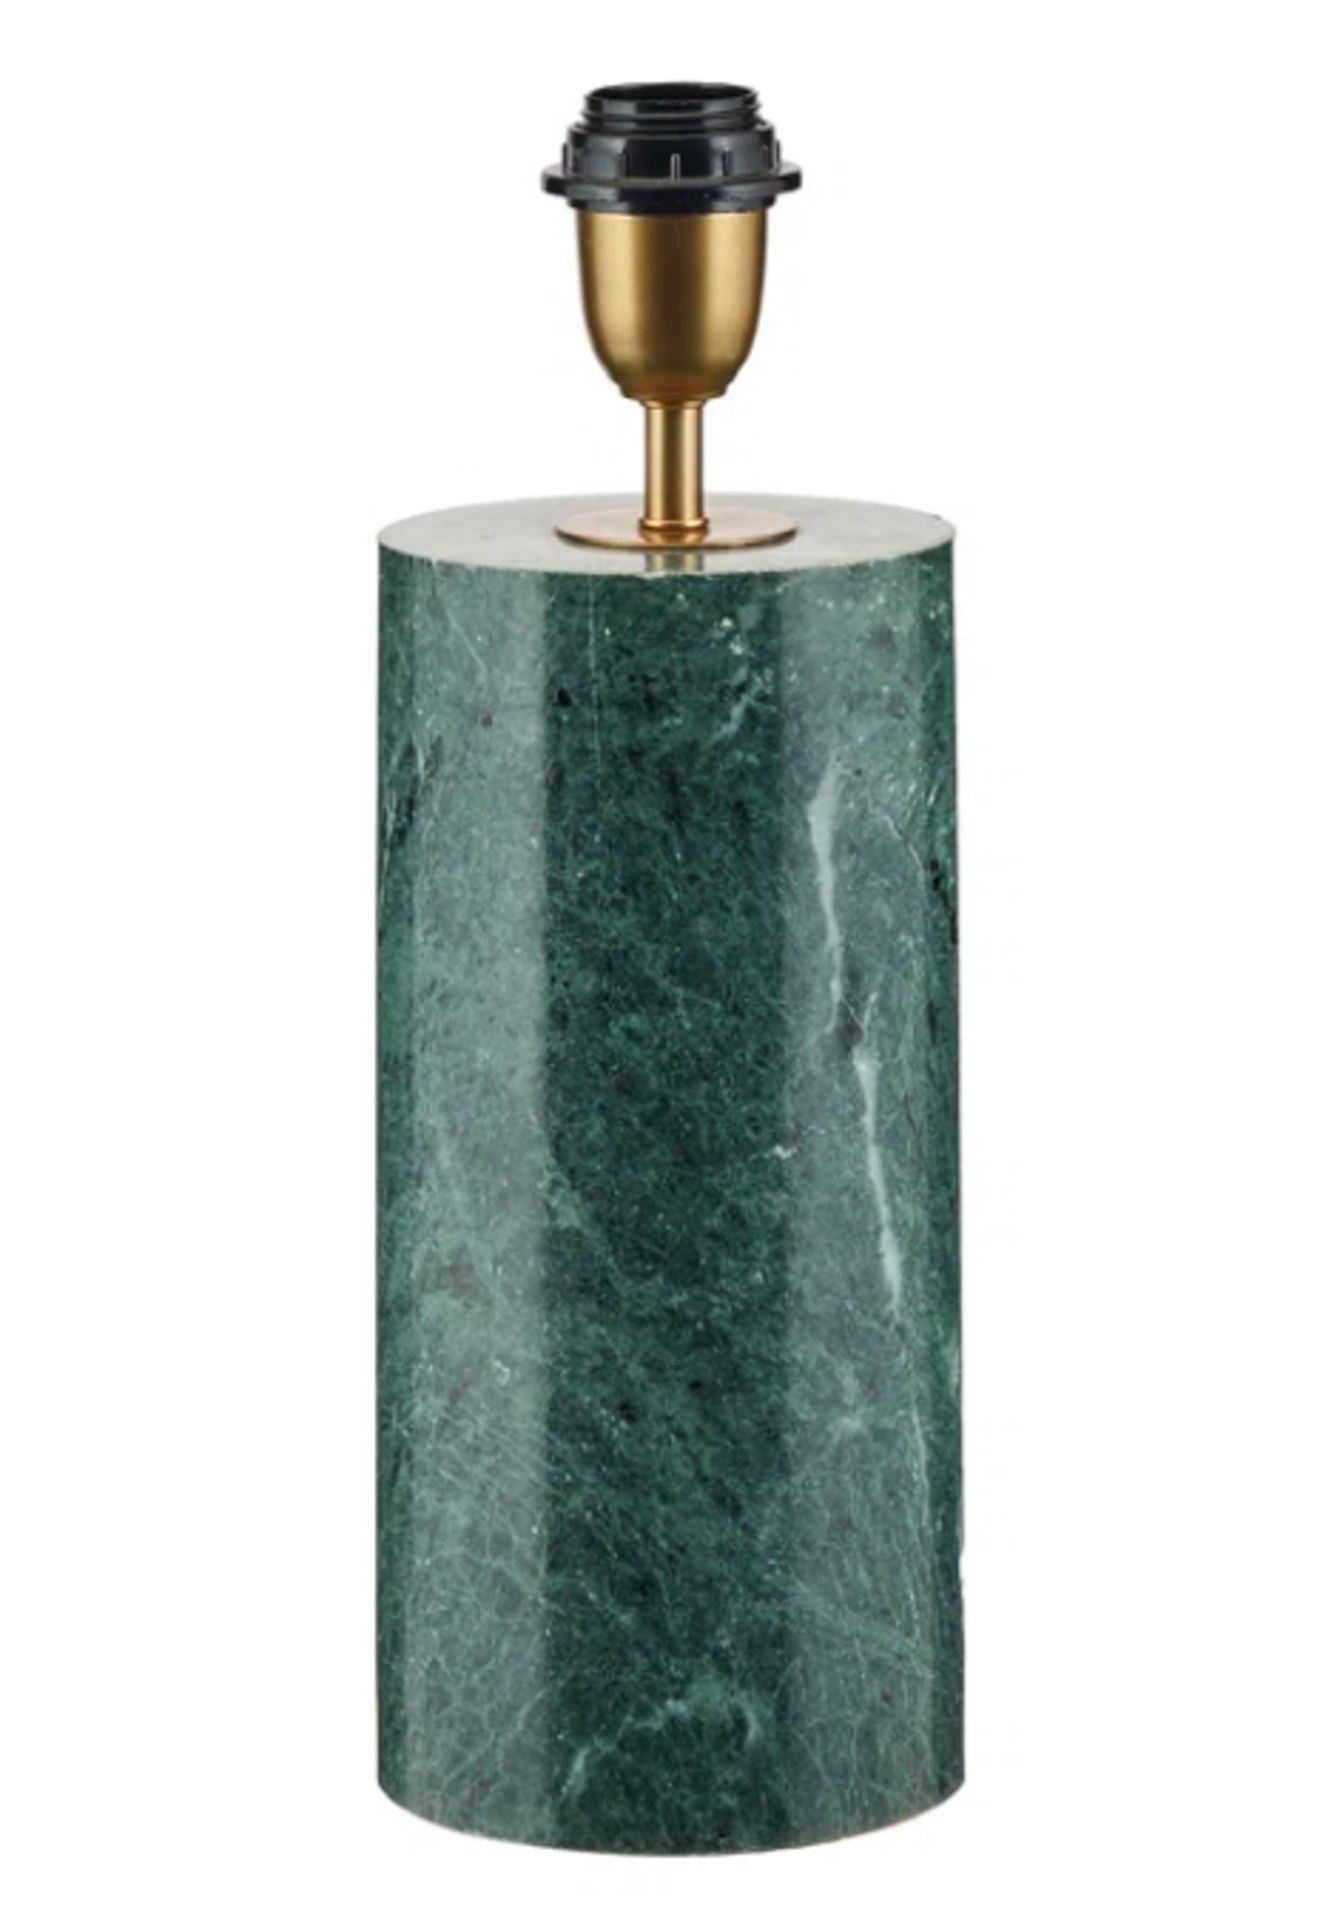 Cottleville 35Cm Table Lamp Base. Add this perfectly proportioned black marble table lamp to your